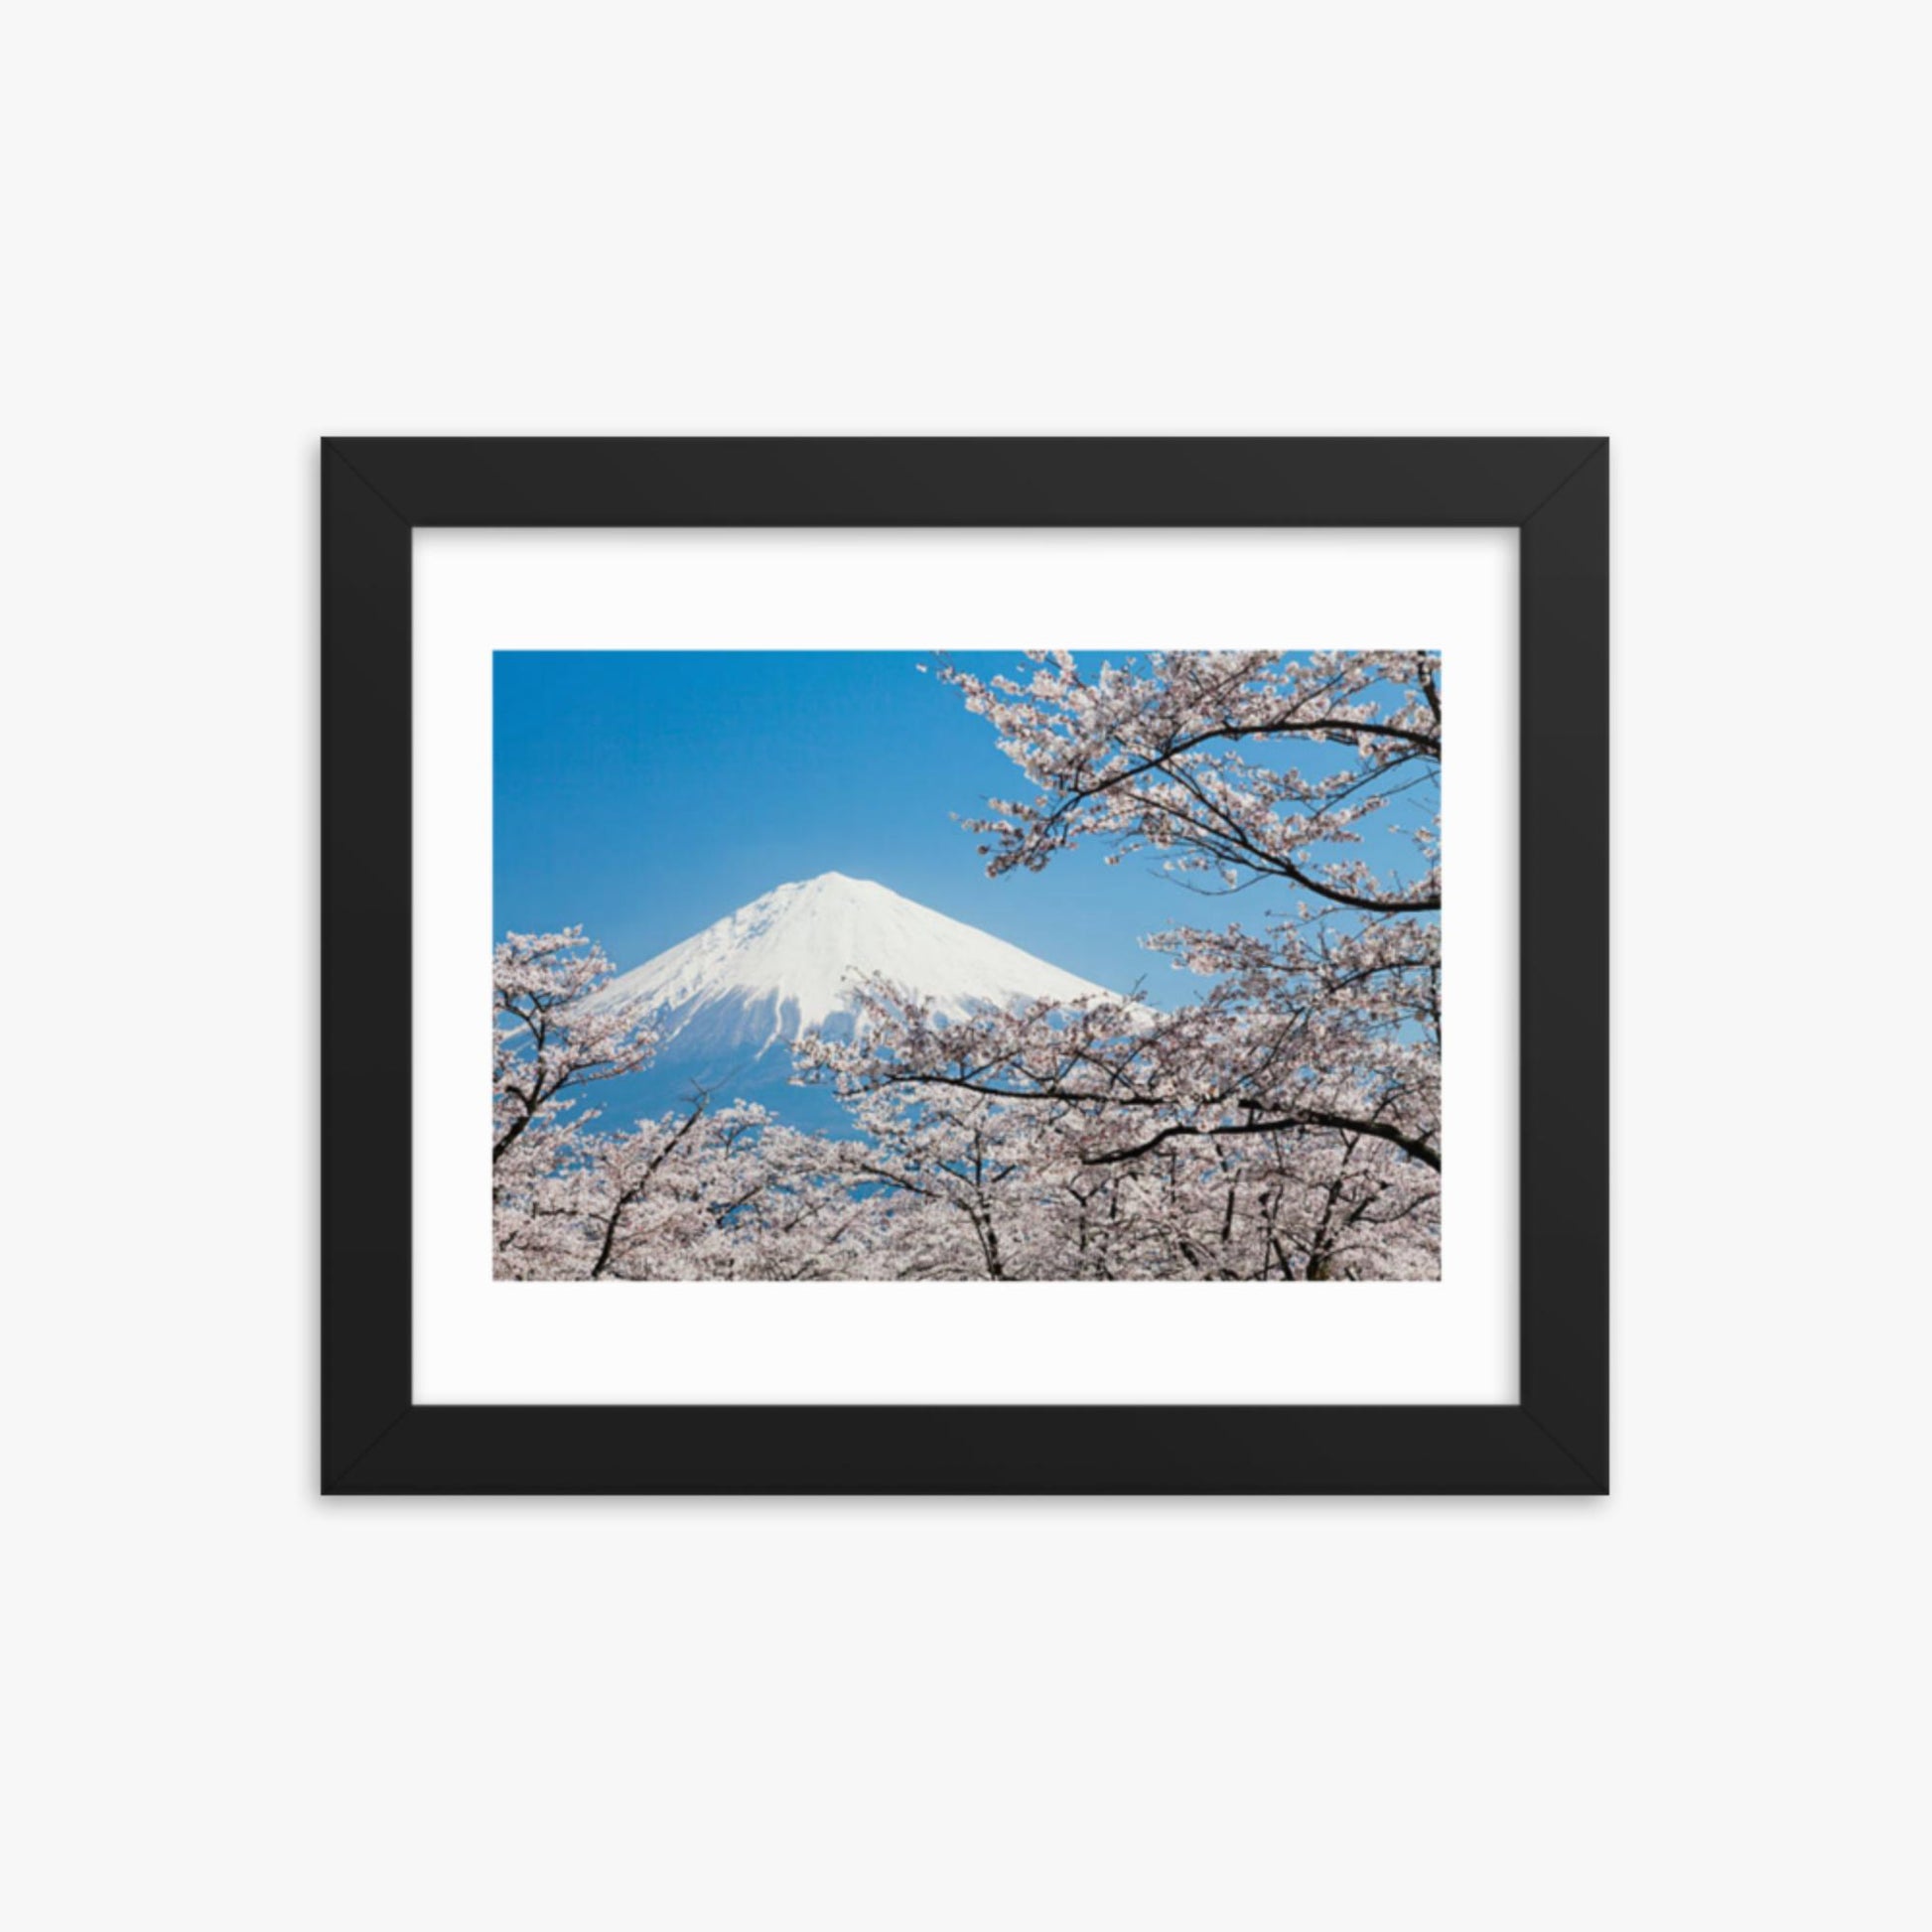 Mount Fuji & Cherry Blossoms 8x10 in Poster With Black Frame